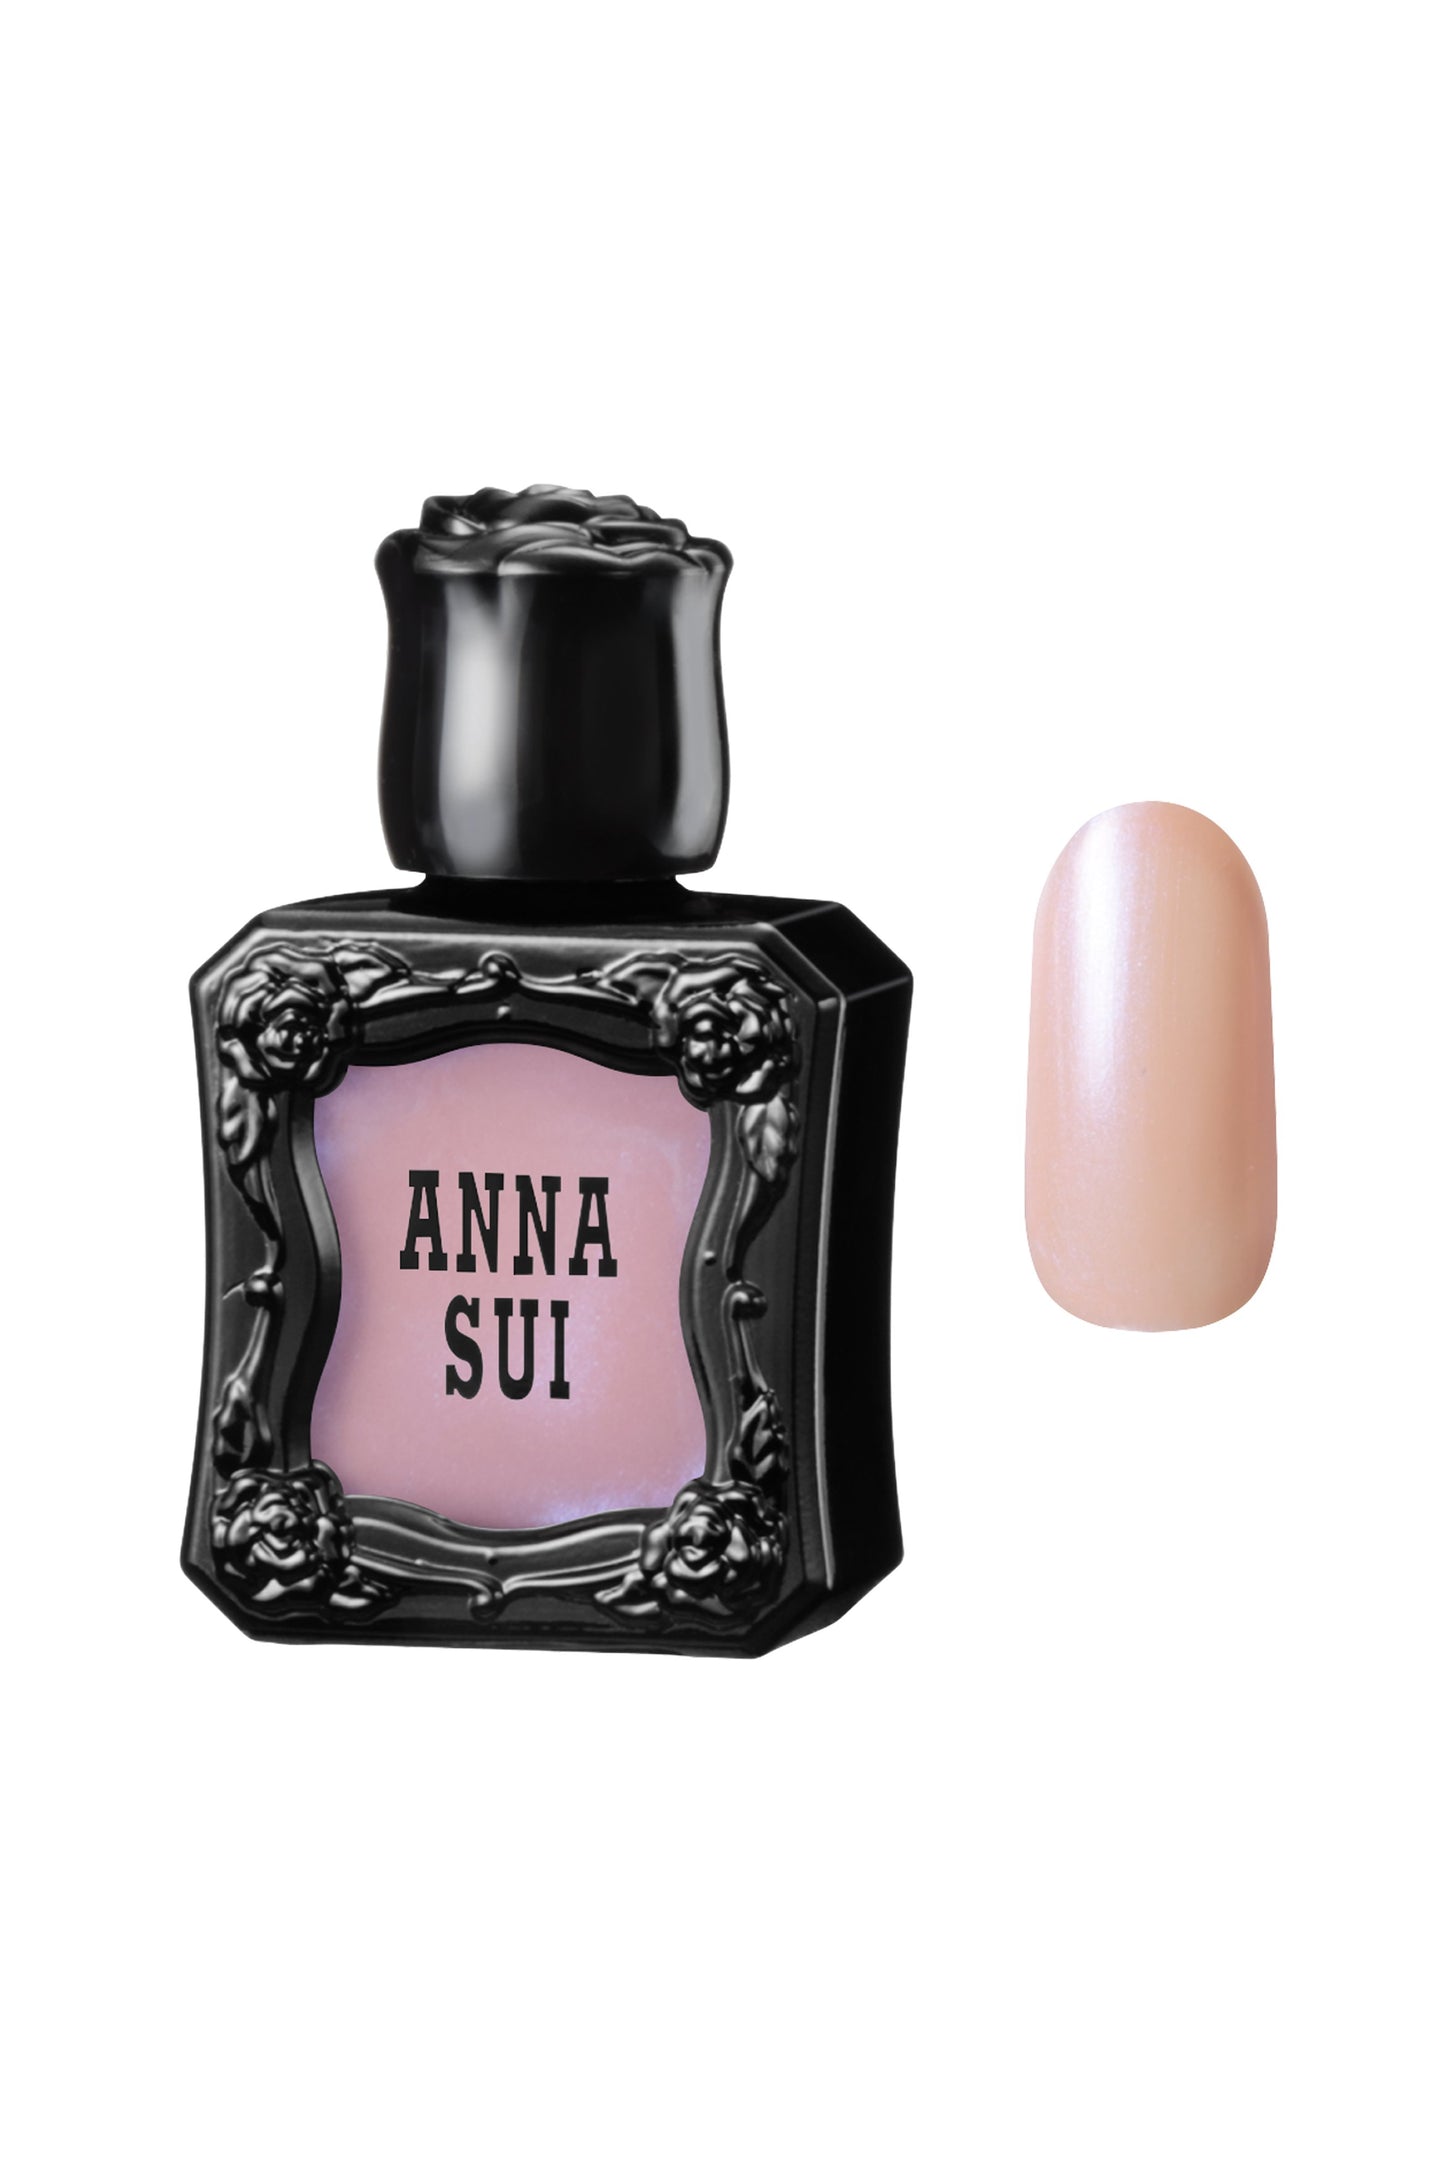 SHELL PINK Nail Polish bottle raised rose pattern, Anna Sui in black over nail colors in bottle front